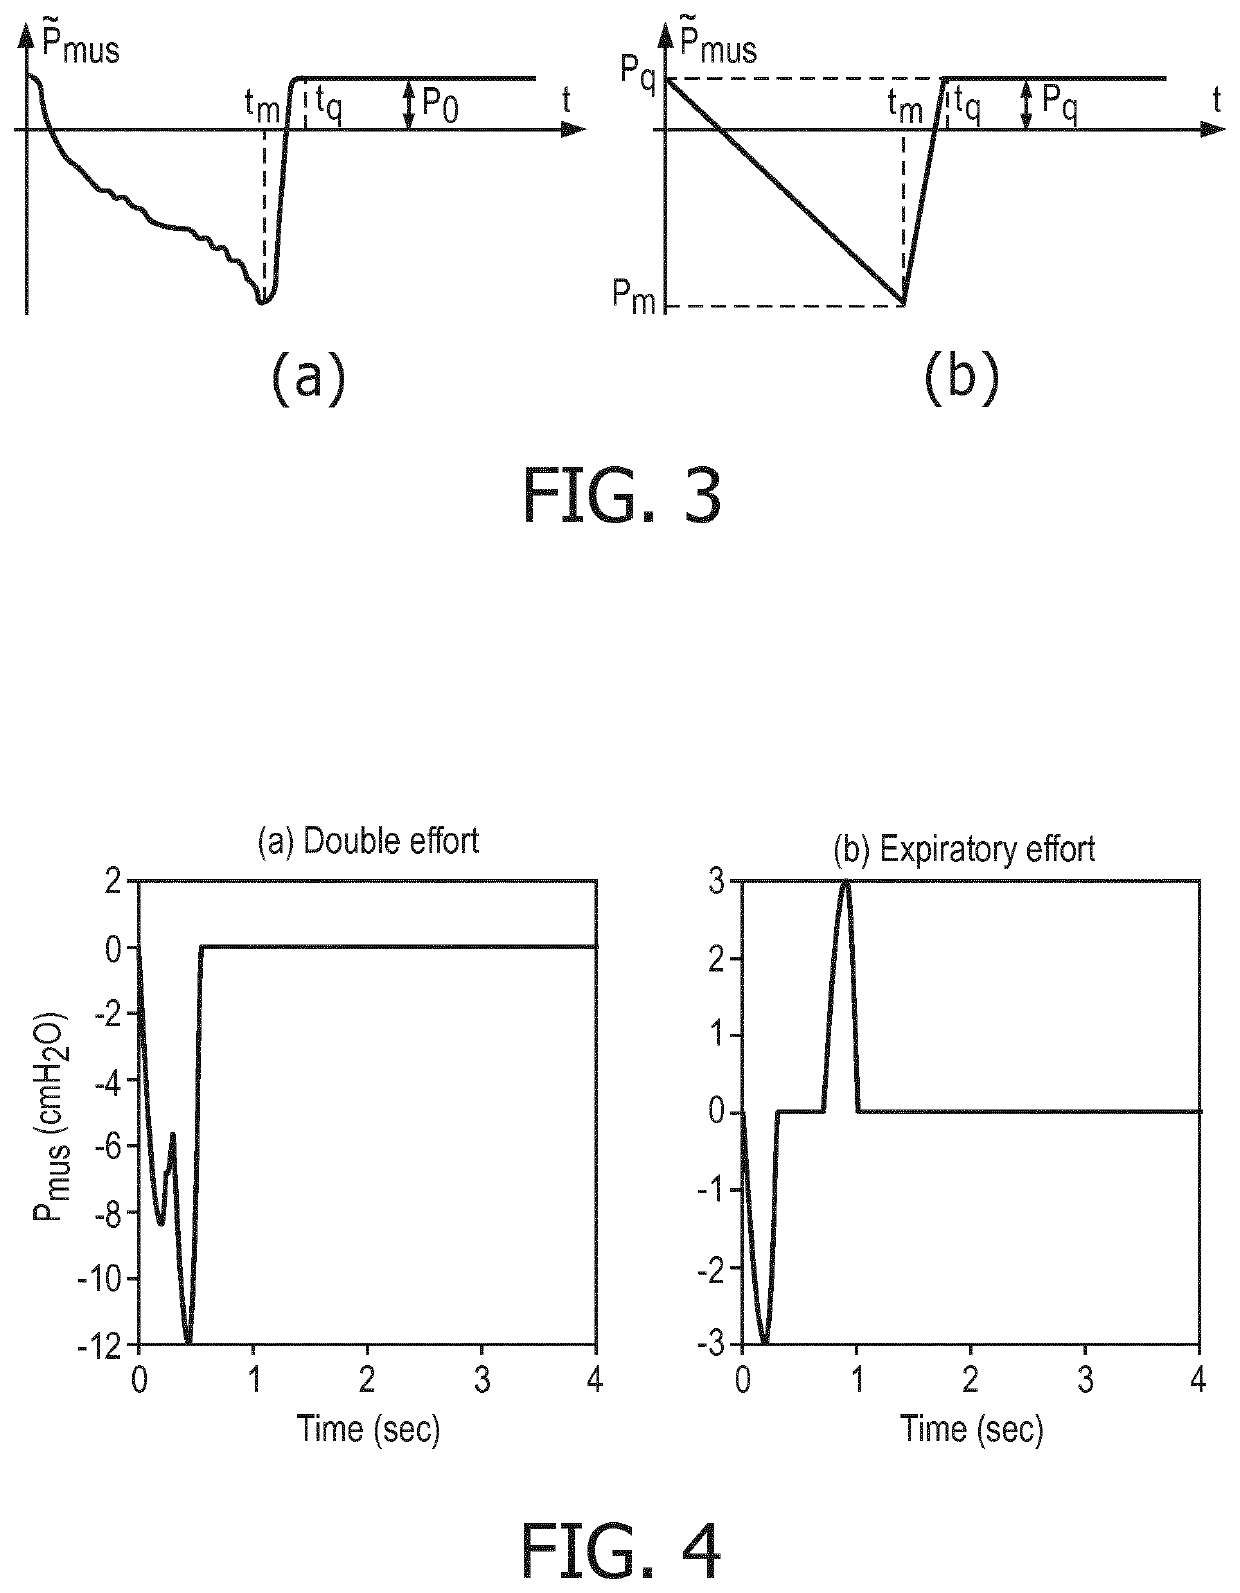 Enhancement of respiratory parameter estimation and asynchrony detection algorithms via the use of centeral venous pressure manometry